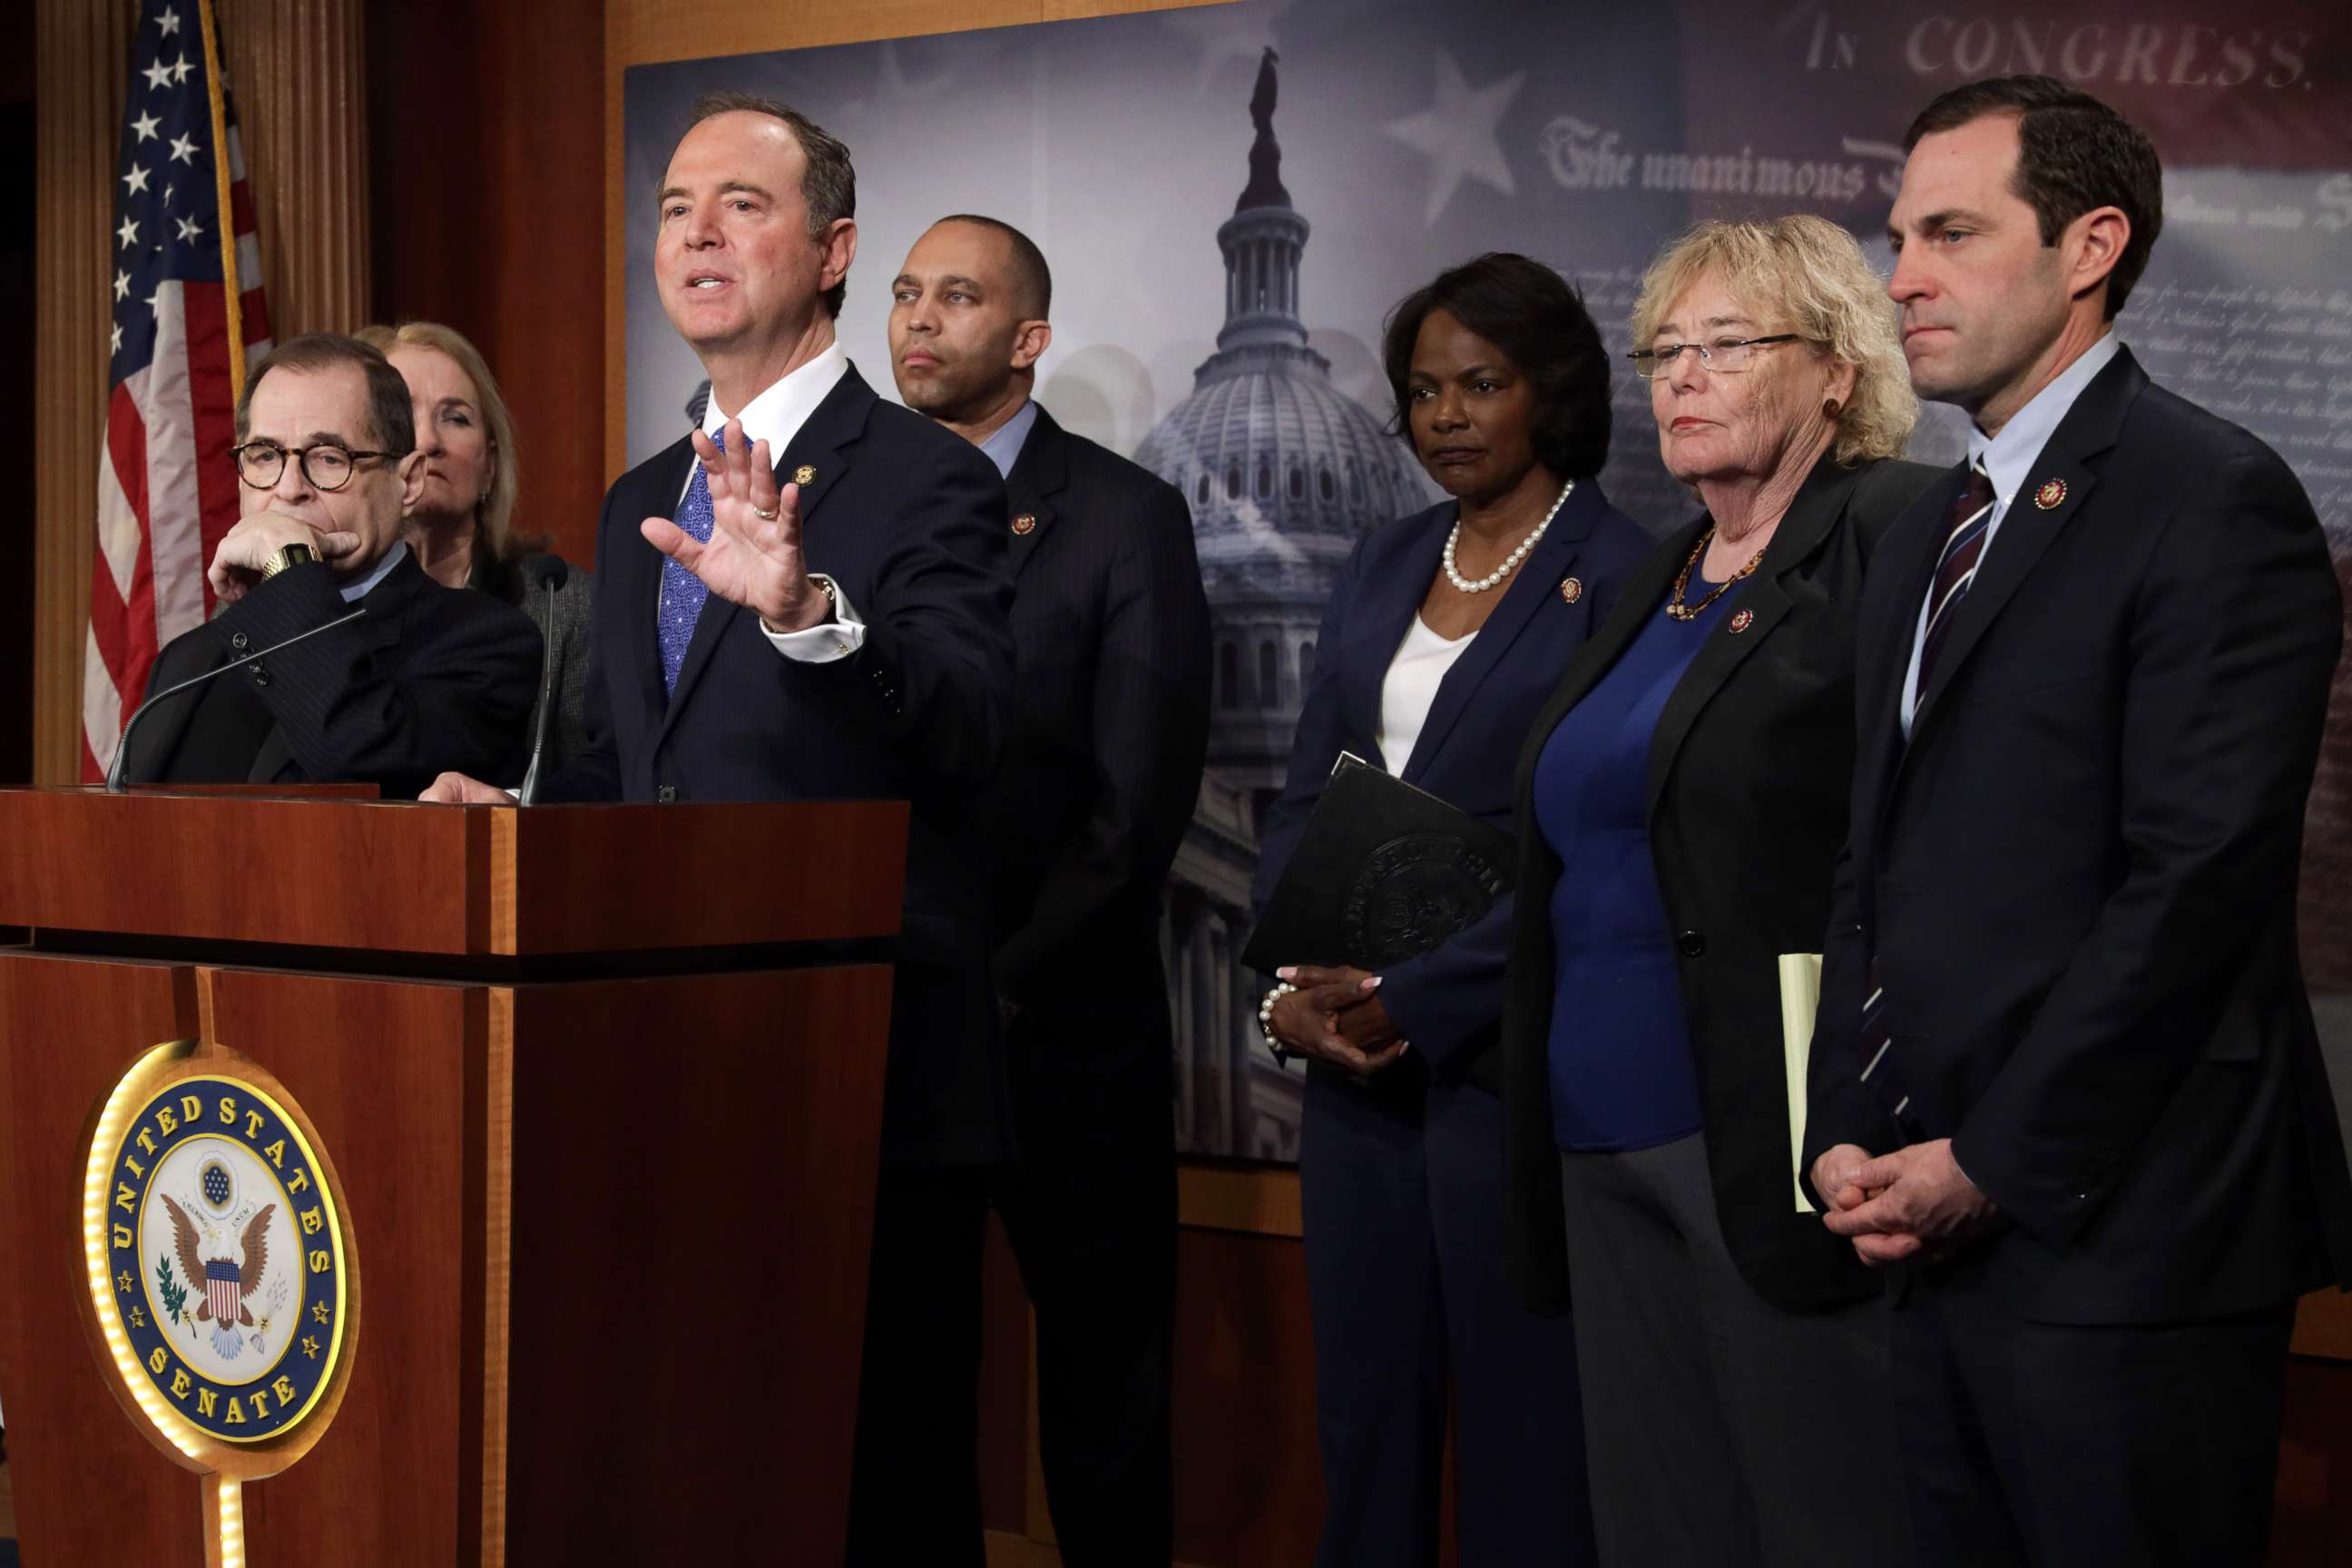 PHOTO: House impeachment managers hold a news conference after day five of the Senate impeachment trial against President Donald Trump at the U.S. Capitol on Jan. 25, 2020, in Washington.